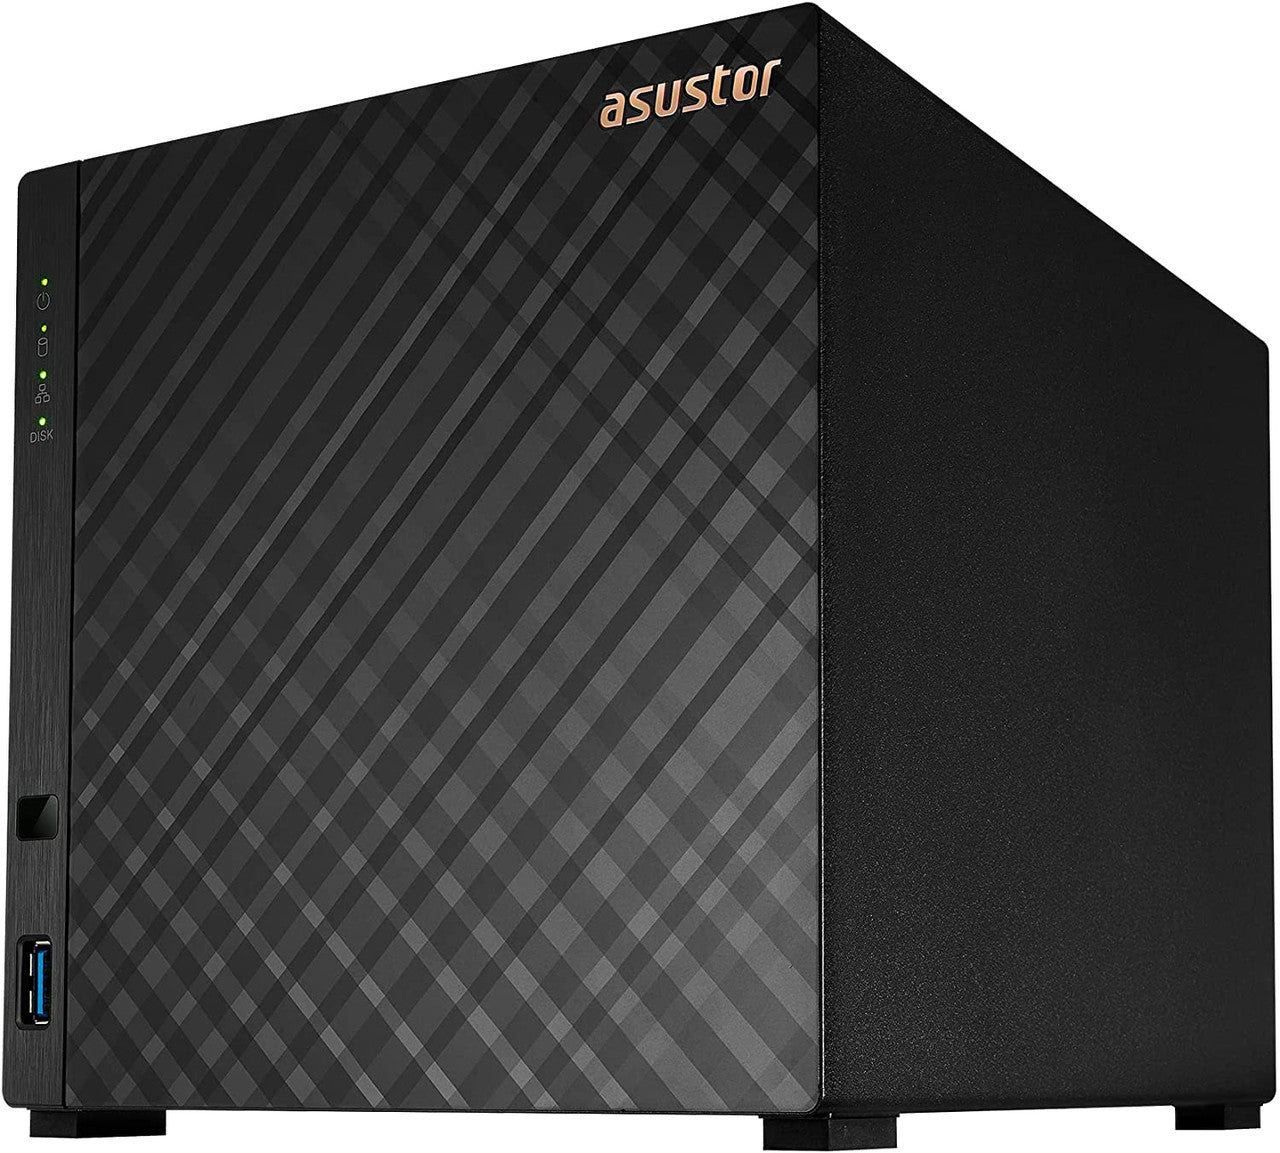 Asustor AS1104T 4-Bay Drivestor 4 NAS with 1GB RAM and 24TB (4x6TB) Seagate Ironwolf NAS Drives